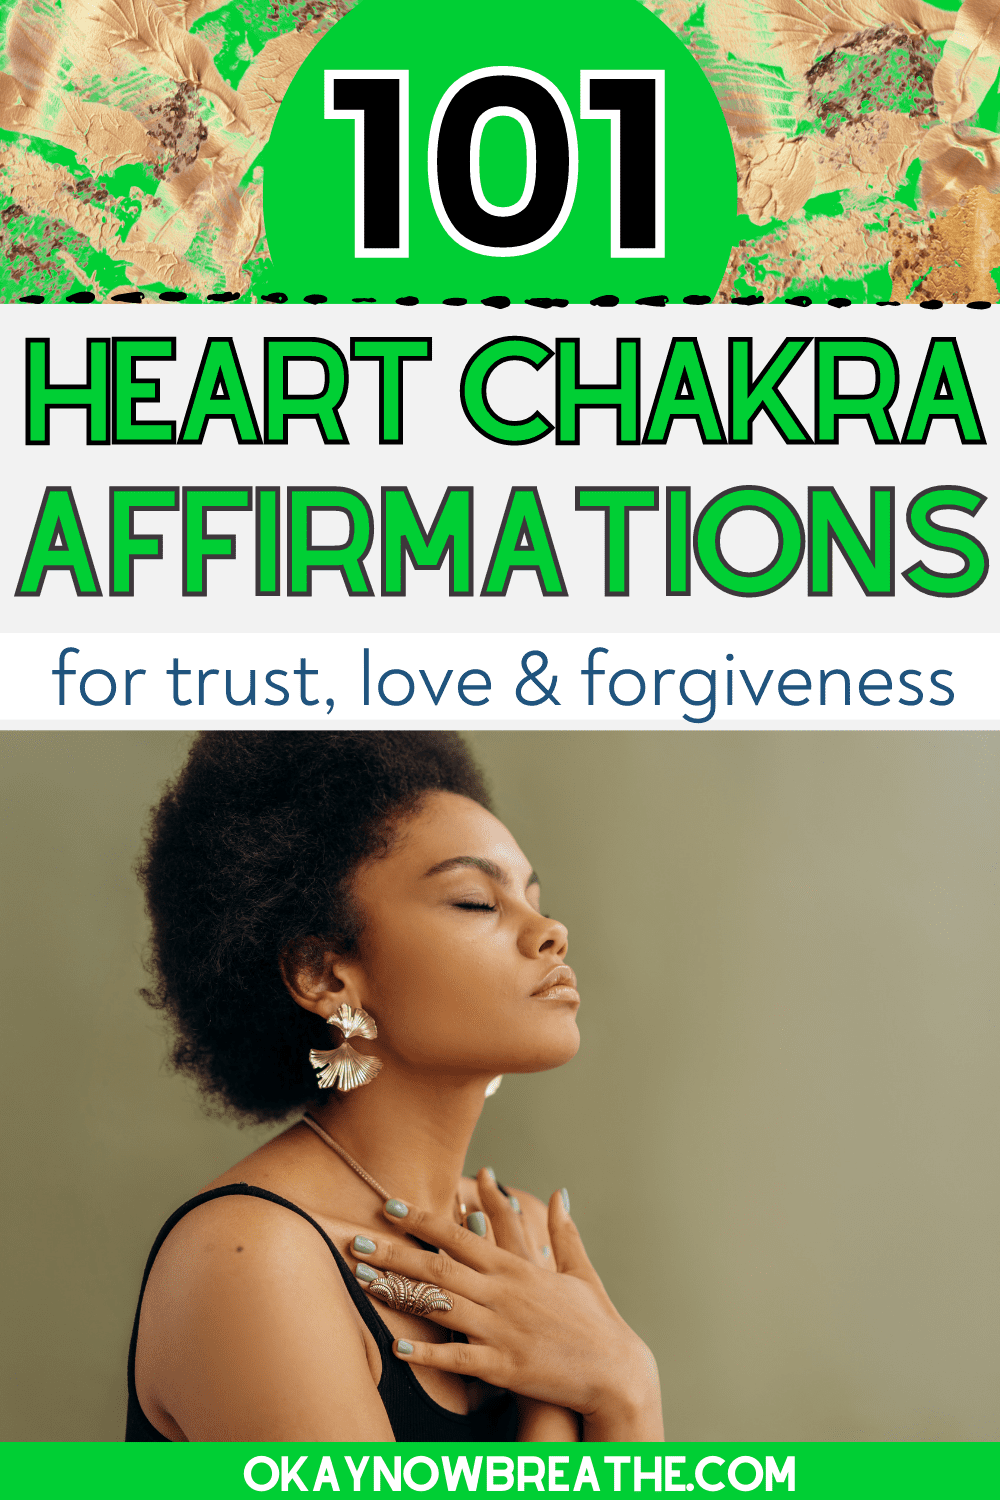 A Black woman has her hands crossed over her heart while she has her eyes closed. She is wearing a black tank top. Above her, there is text that says, "101 heart chakra affirmations for trust, love & forgiveness. - okaynowbreathe.com"